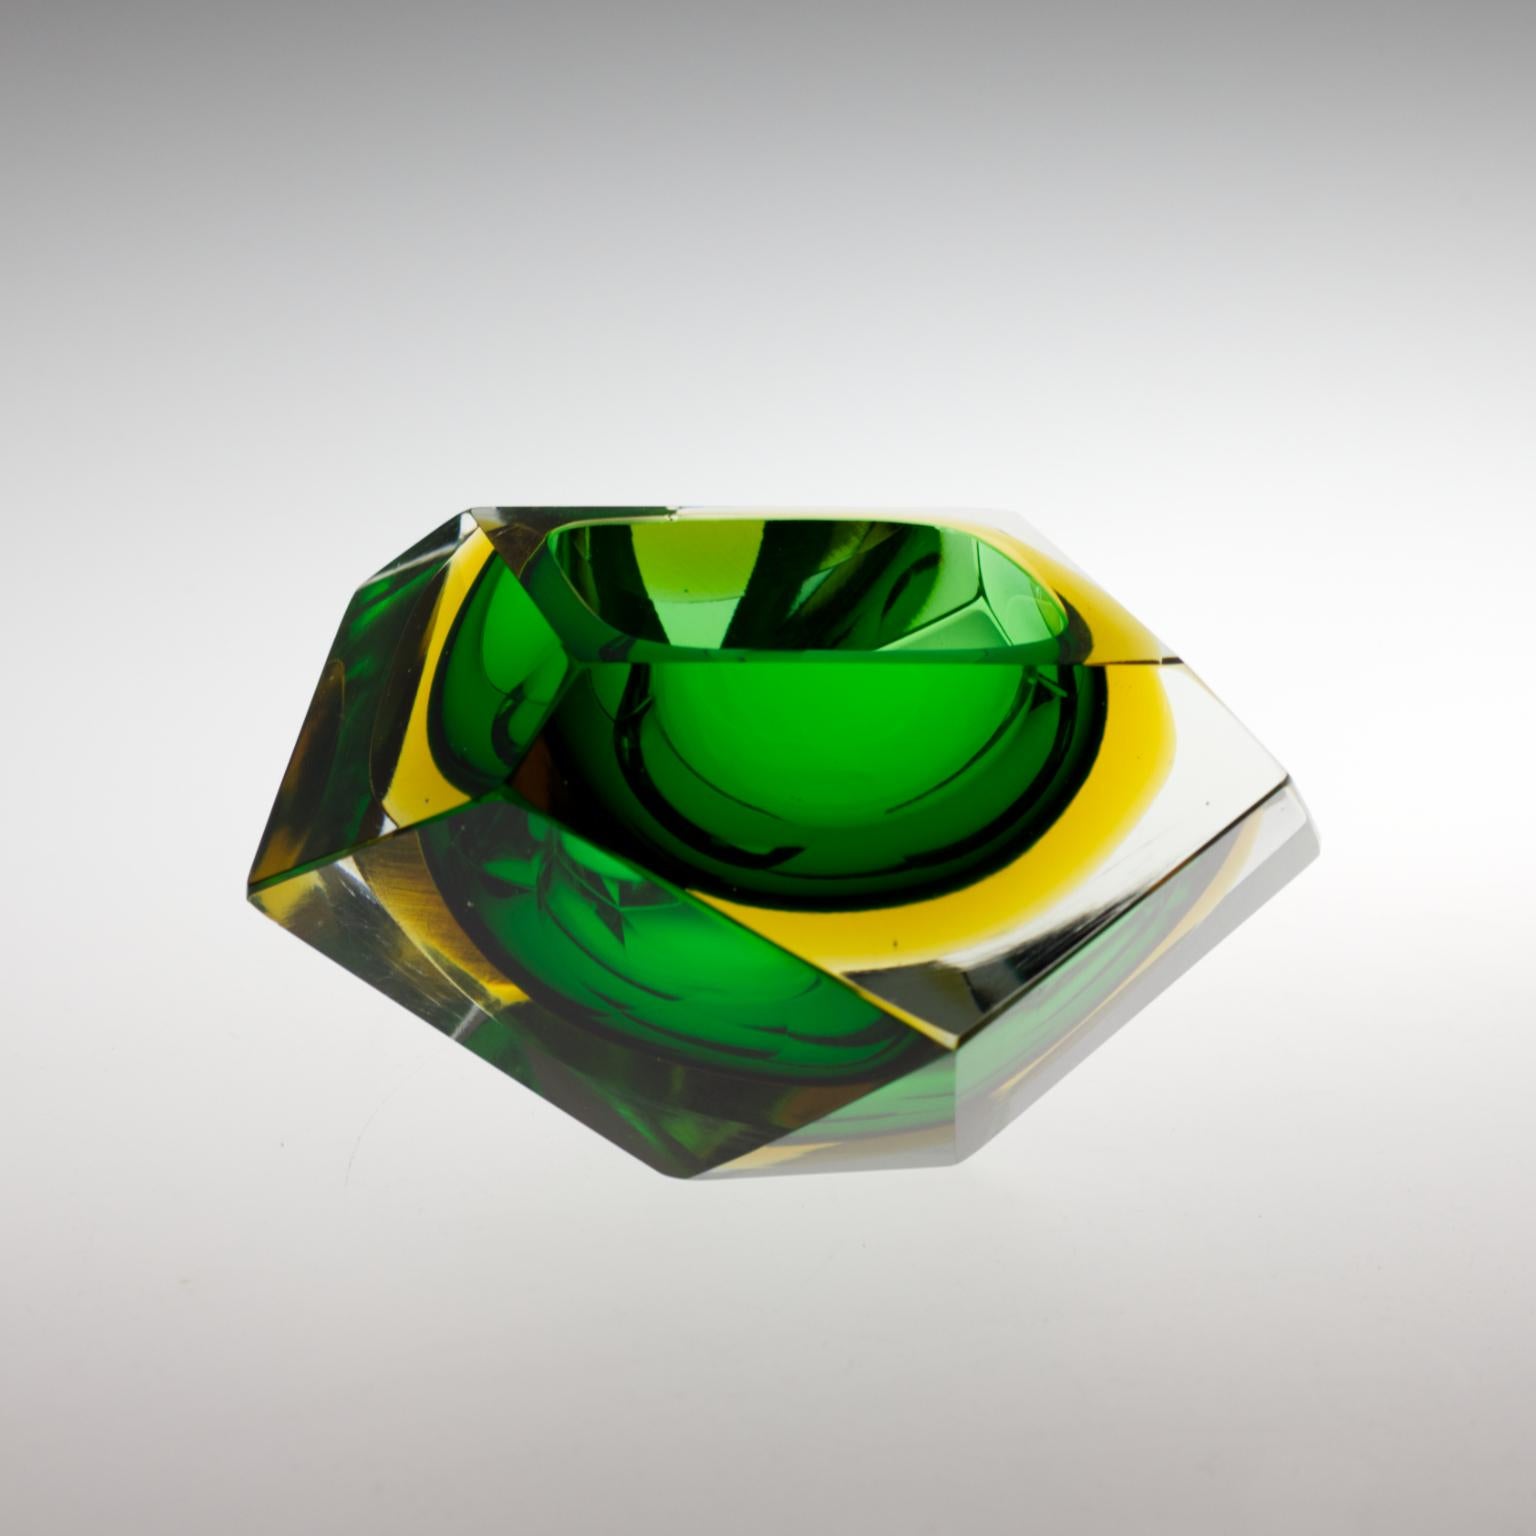 Italian  Murano Sommerso  Green Faceted Glass  Bowl by Flavio Poli 1960´s For Sale